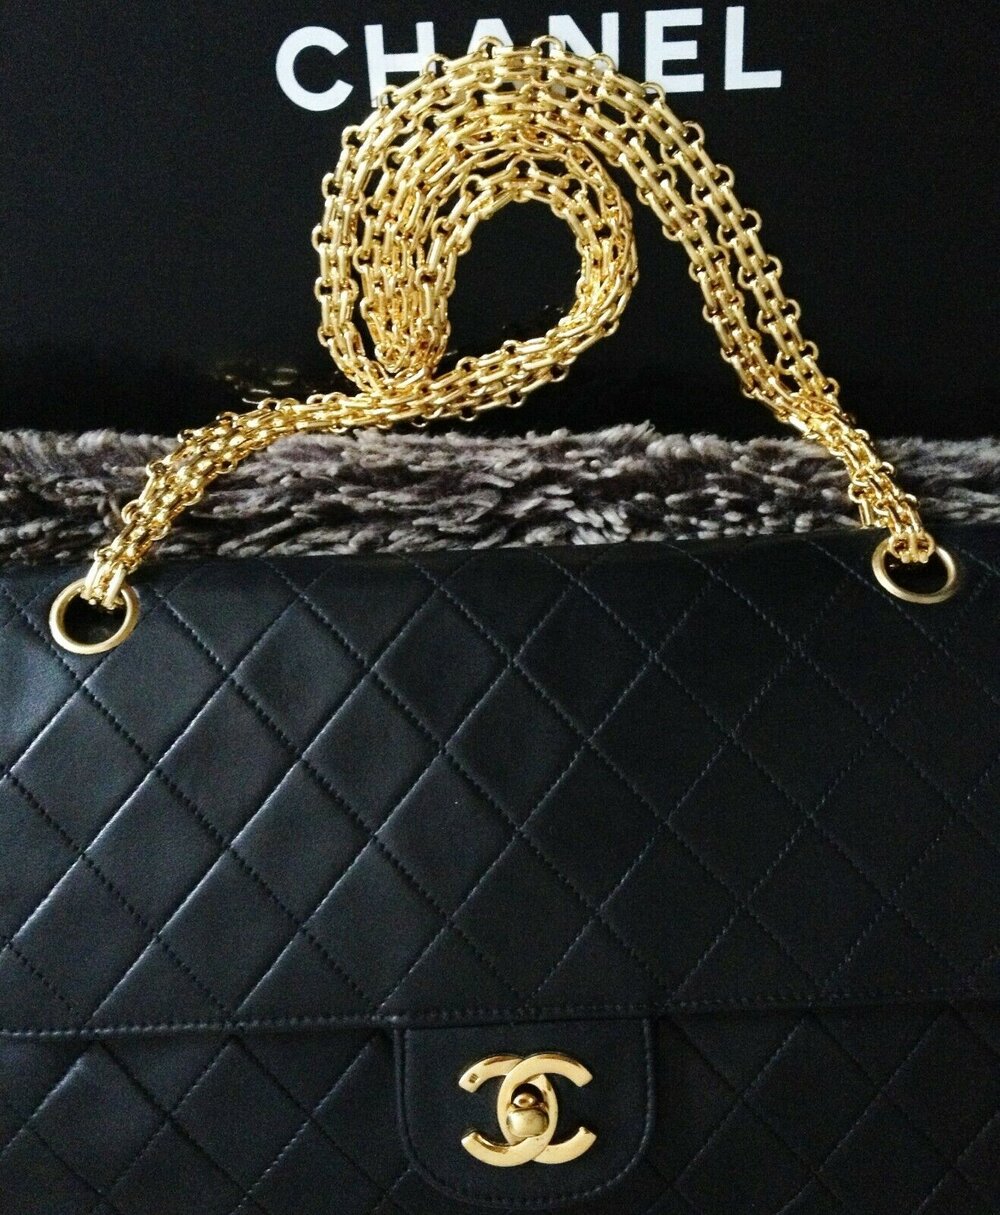 Chanel Shoulder Bag Double Gold Ball Chain In Black - Praise To Heaven